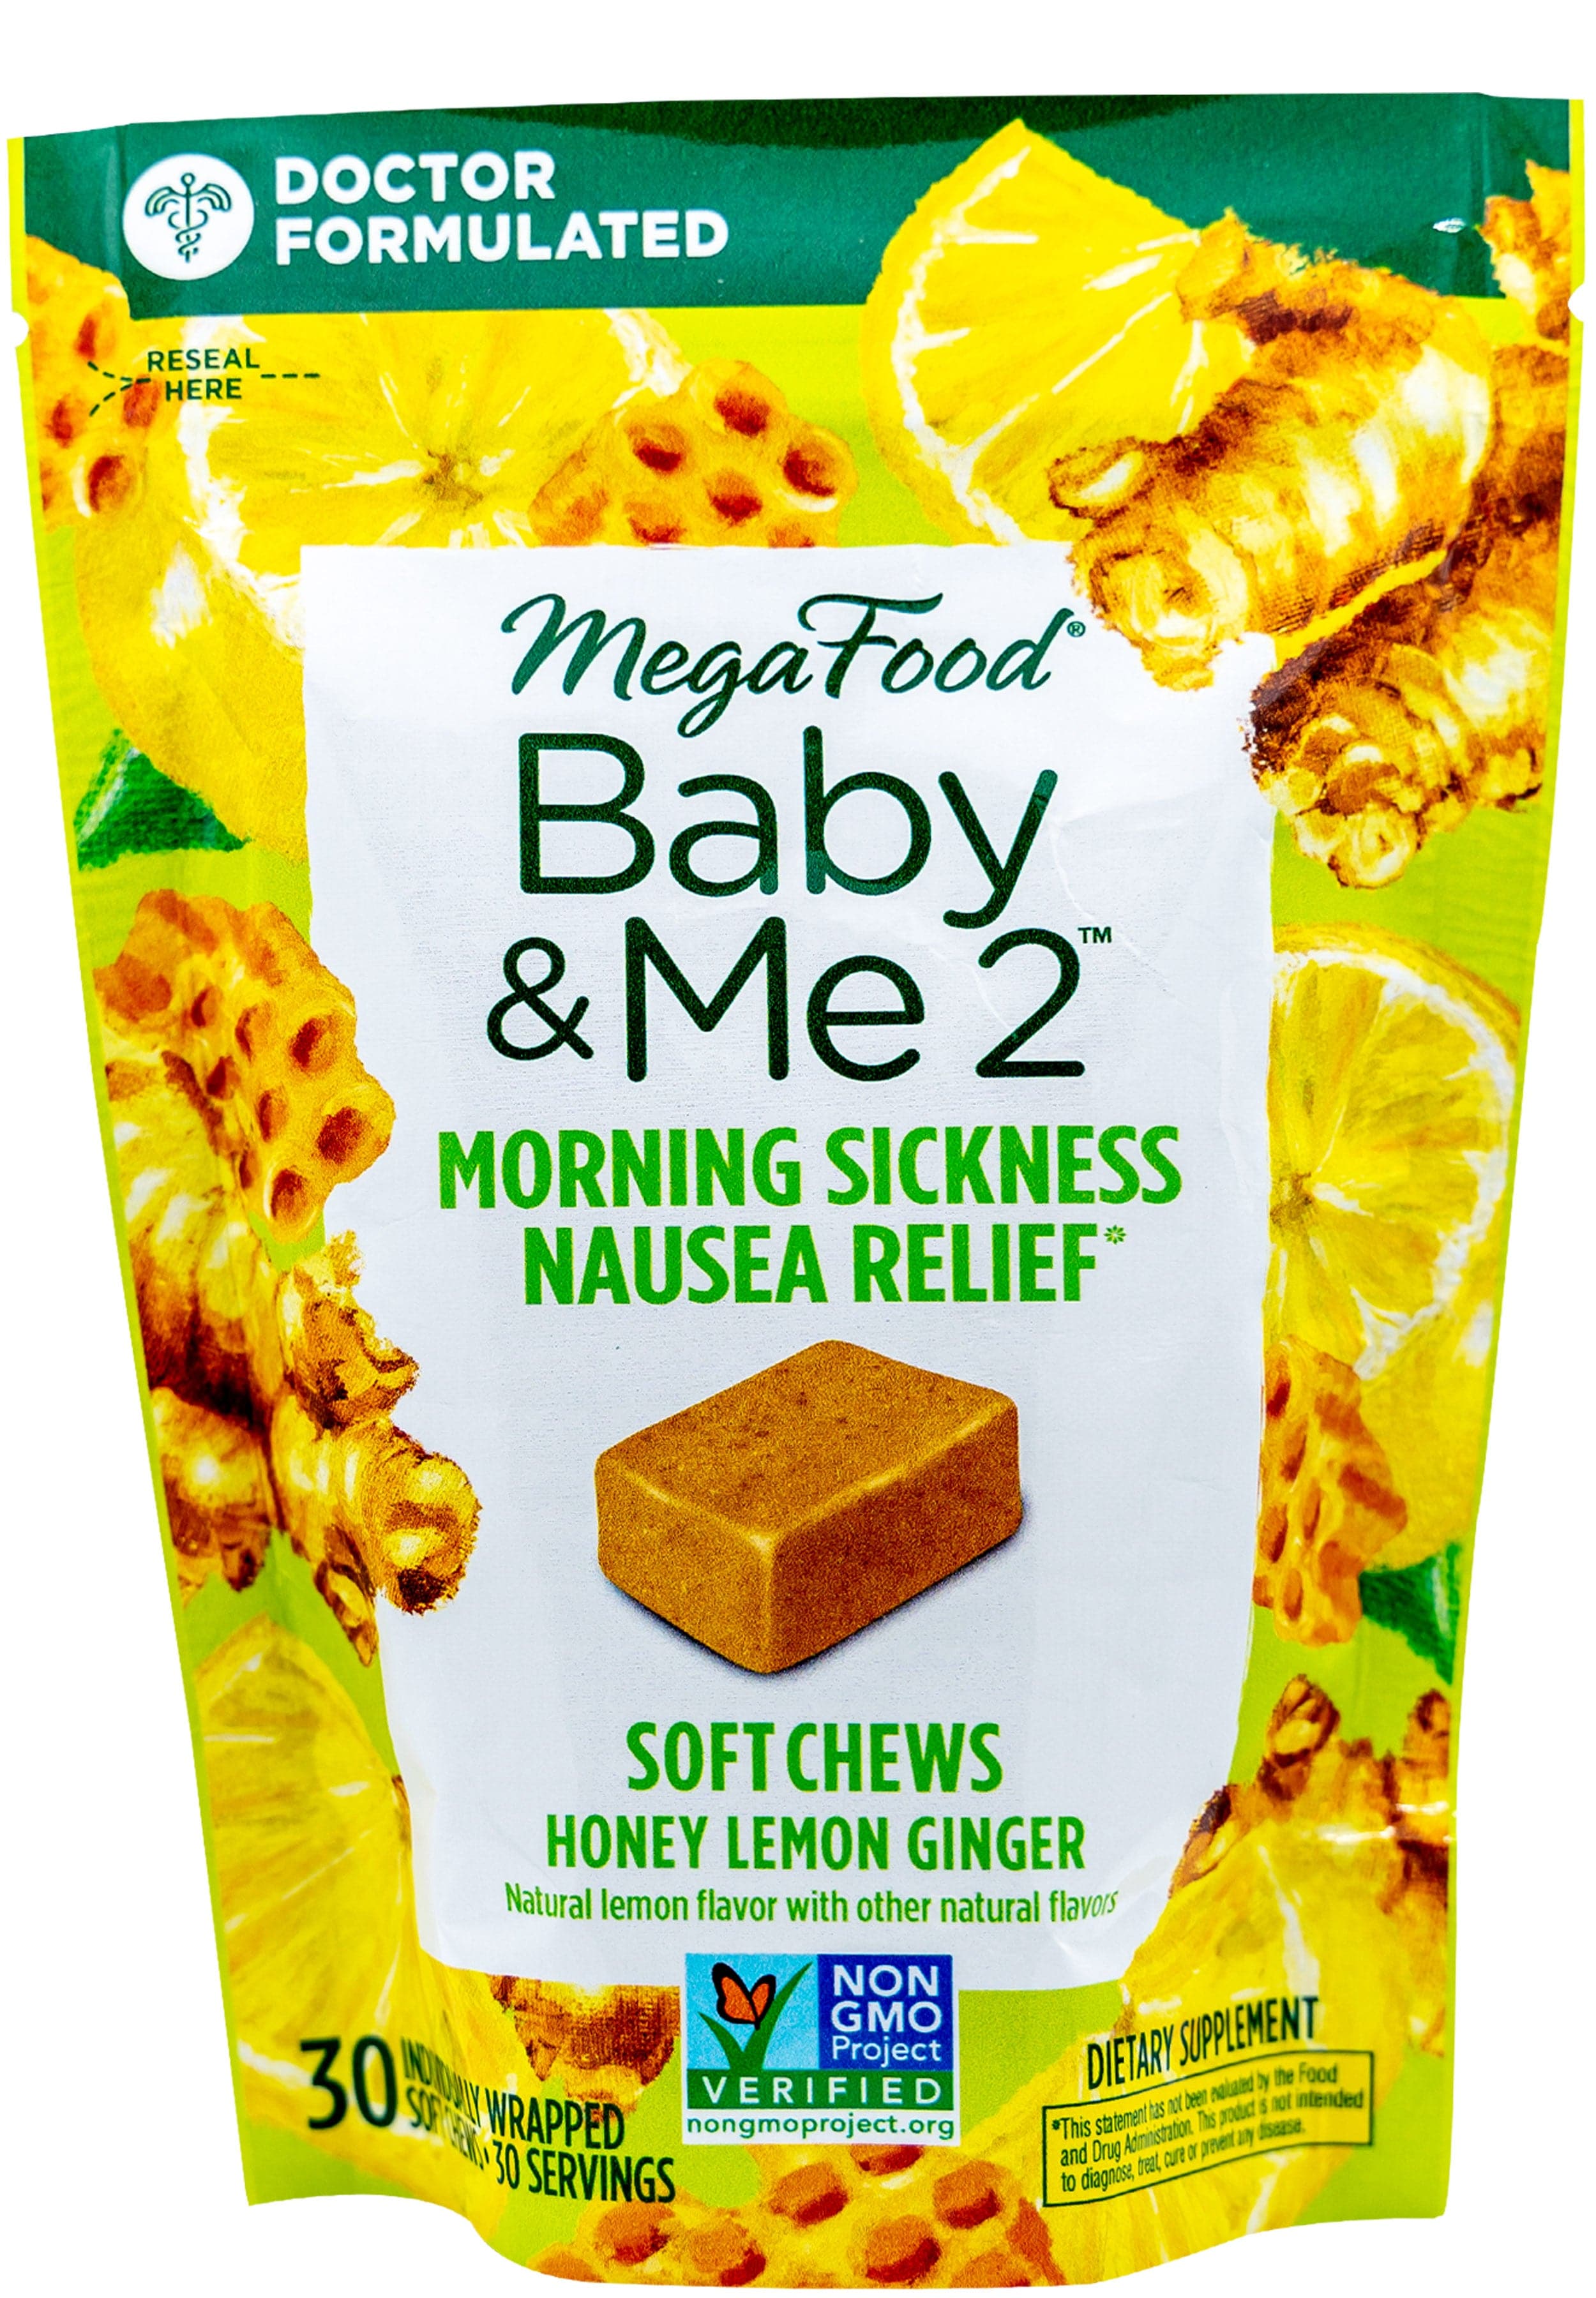 MegaFood Baby & Me 2 Morning Sickness Nausea Relief Soft Chews